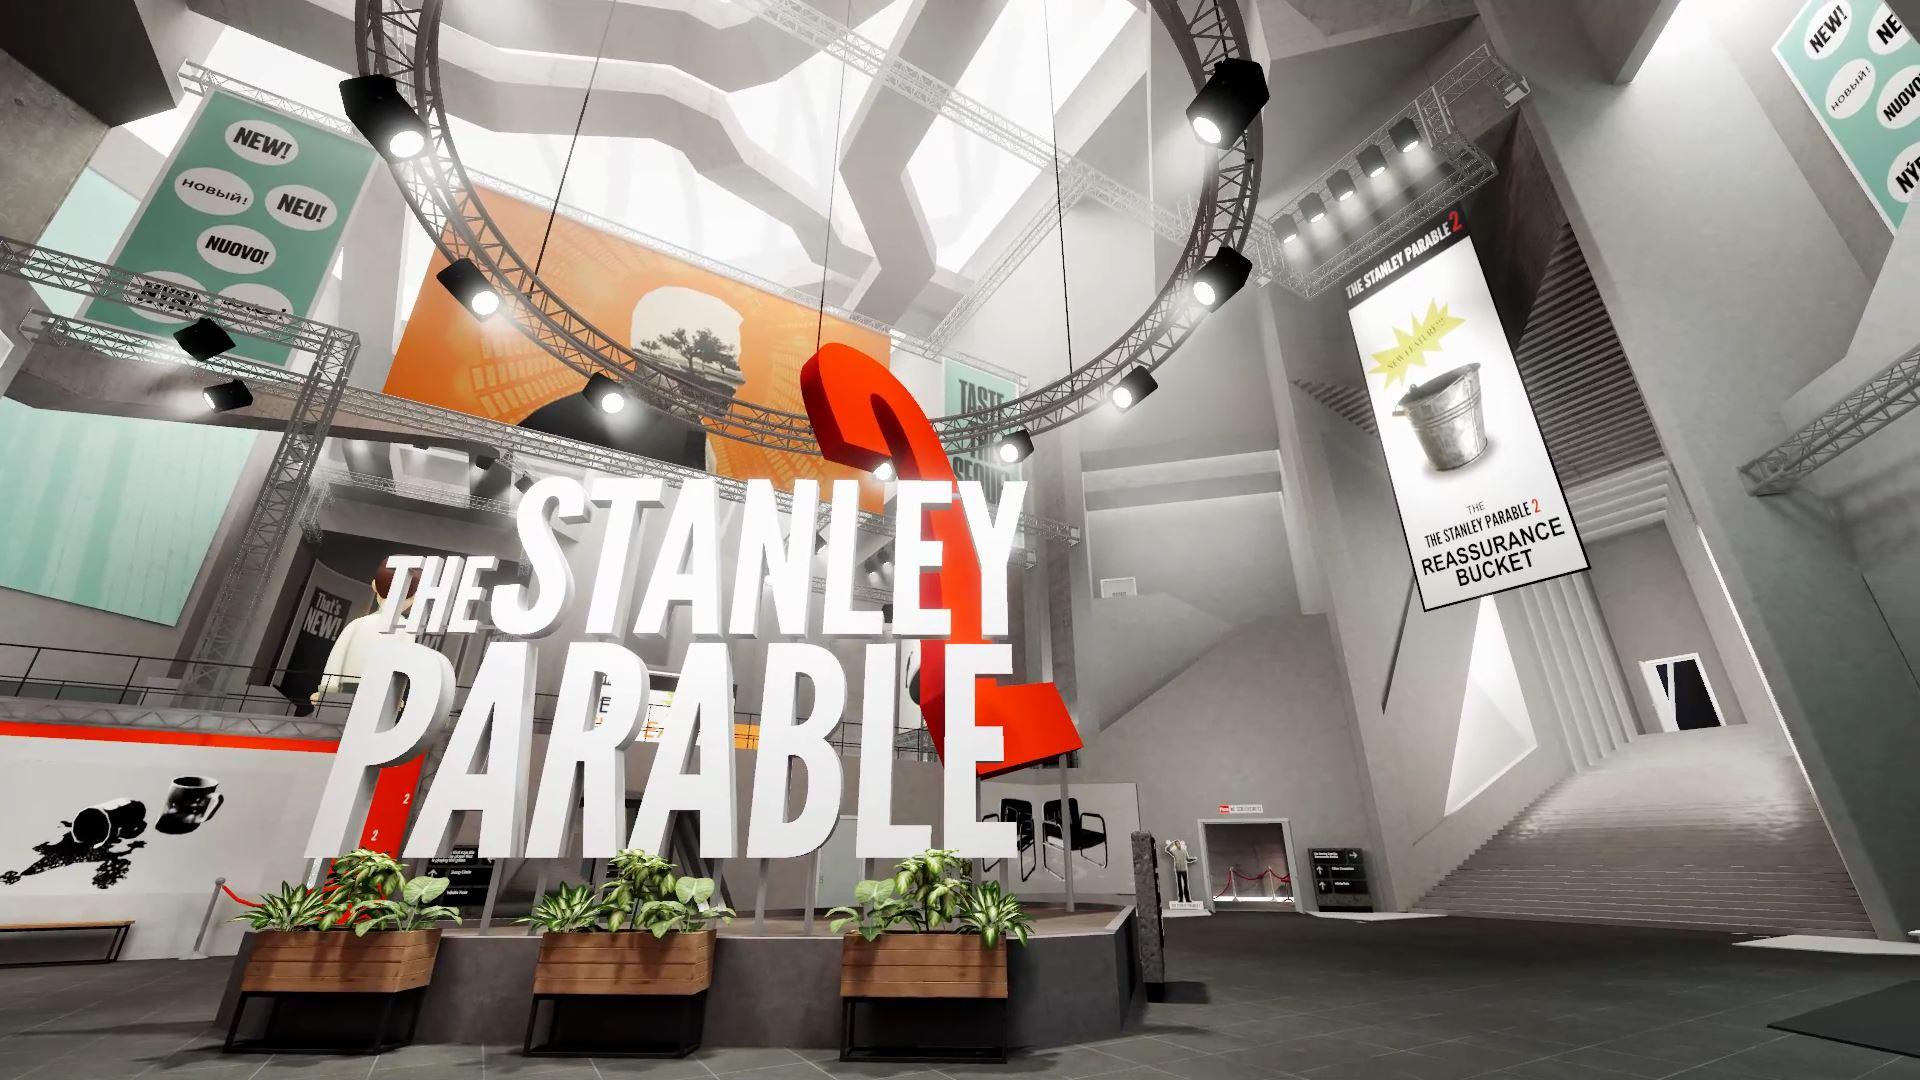 Stanley parable ultra. The Stanley Parable Стэнли. The Stanley Parable: Ultra Deluxe. Стэнли парабл 2. Игра the Stanley Parable.